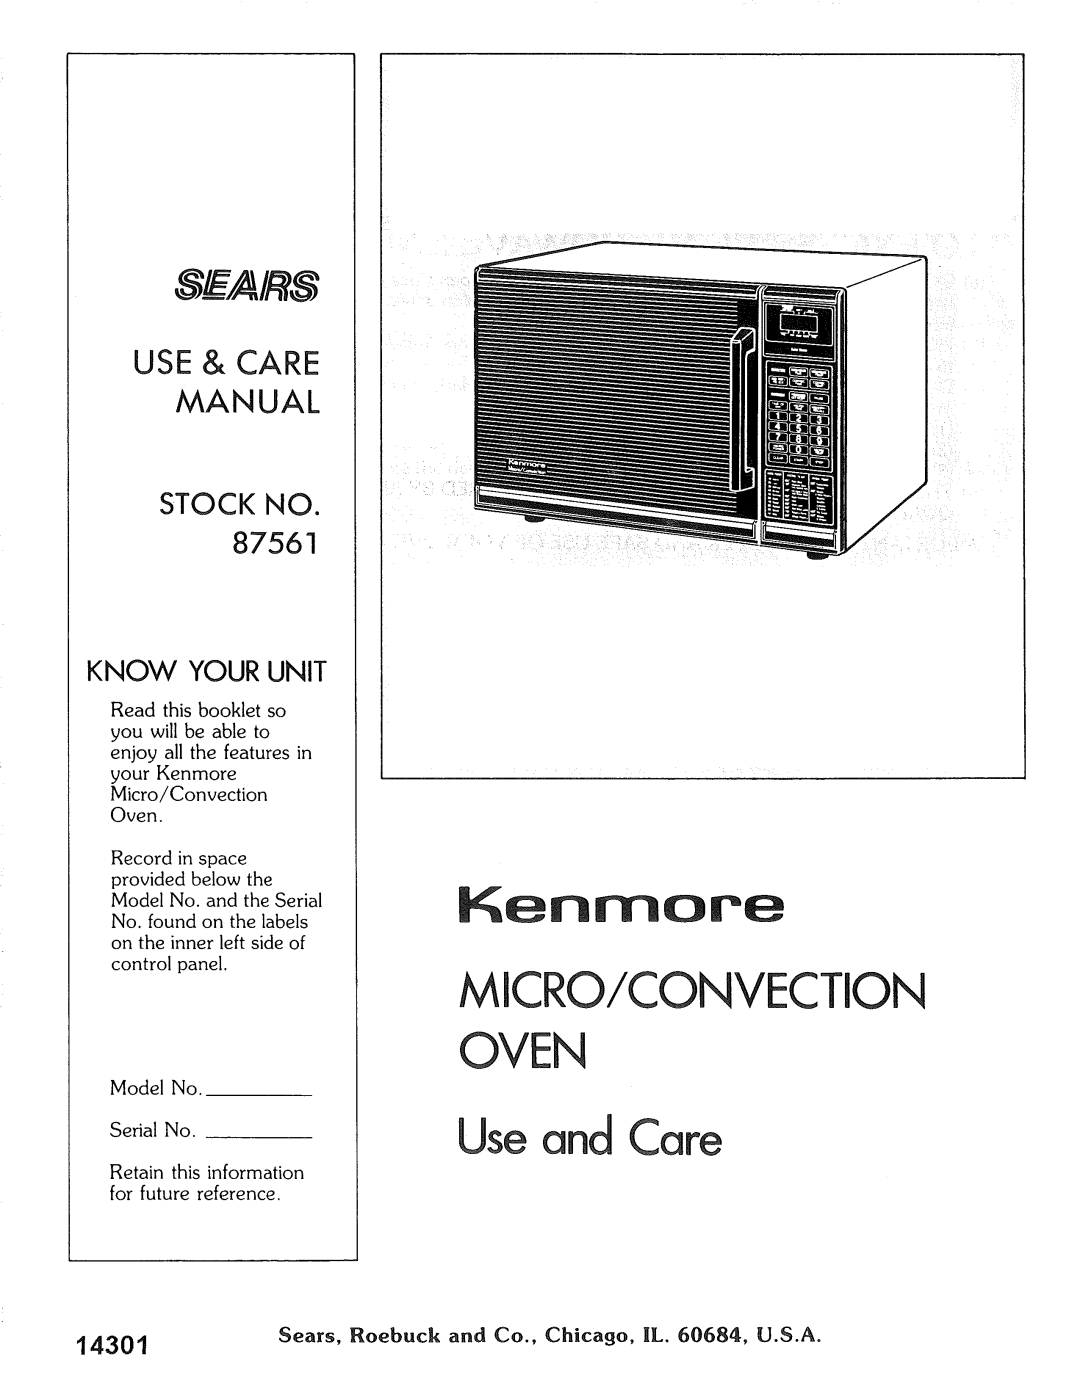 Kenmore manual MICRO/CONVECTION OVEN Useand Care, KennFlore, STOCK NO 87561, Sears, Use & Care Manual, Know Your Unit 